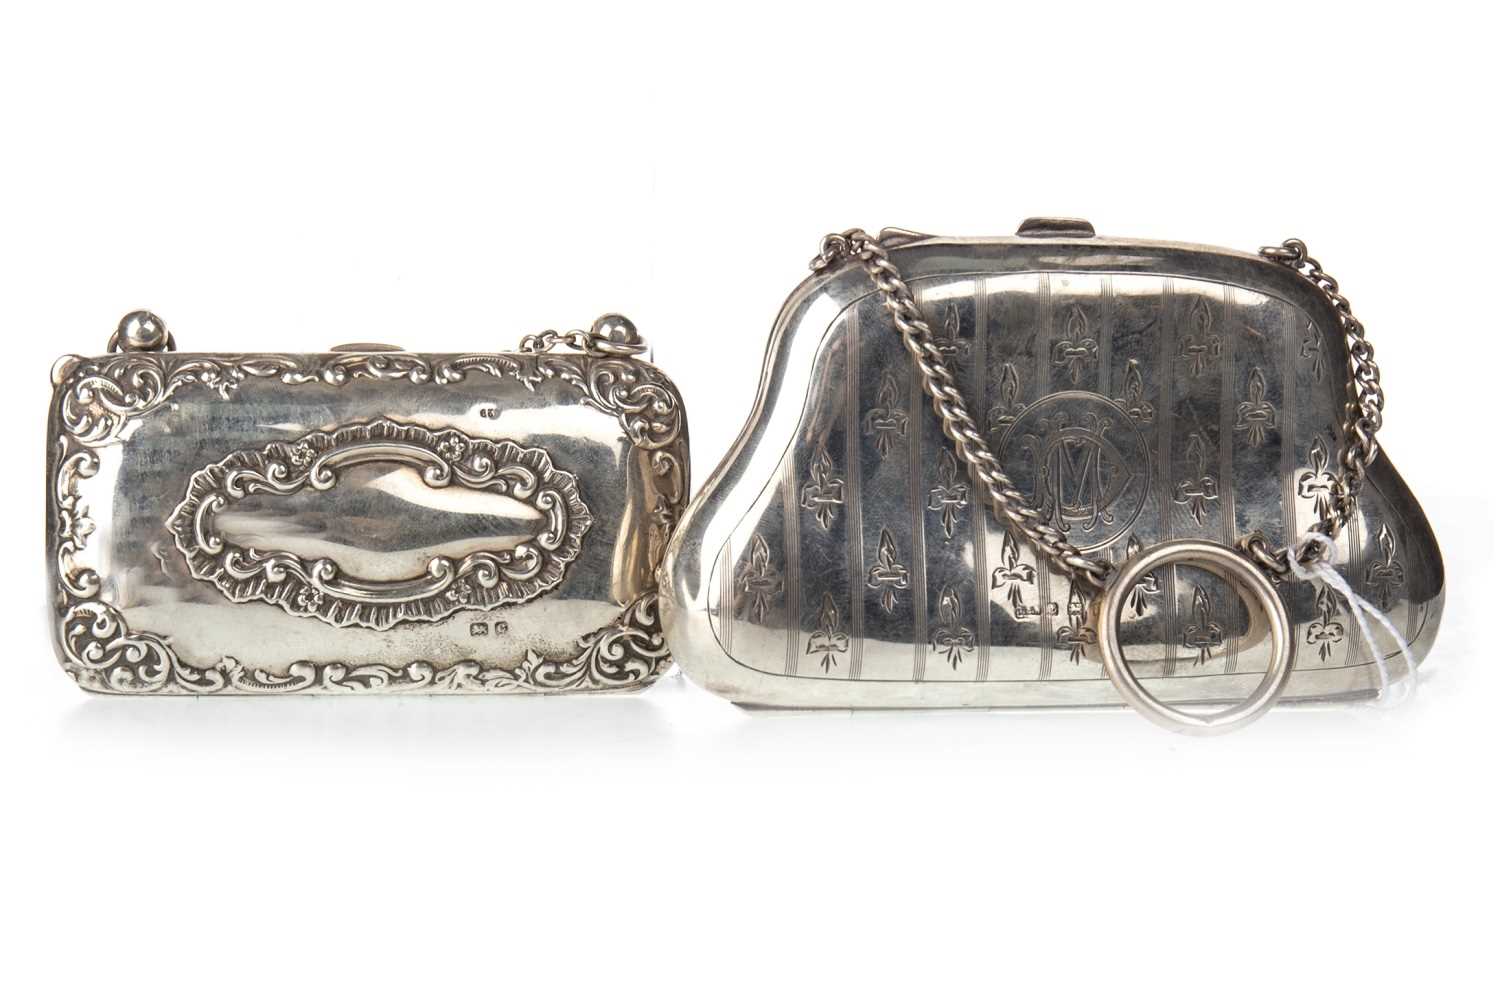 Lot 904 - A LOT OF TWO EARLY 20TH CENTURY SILVER PURSES